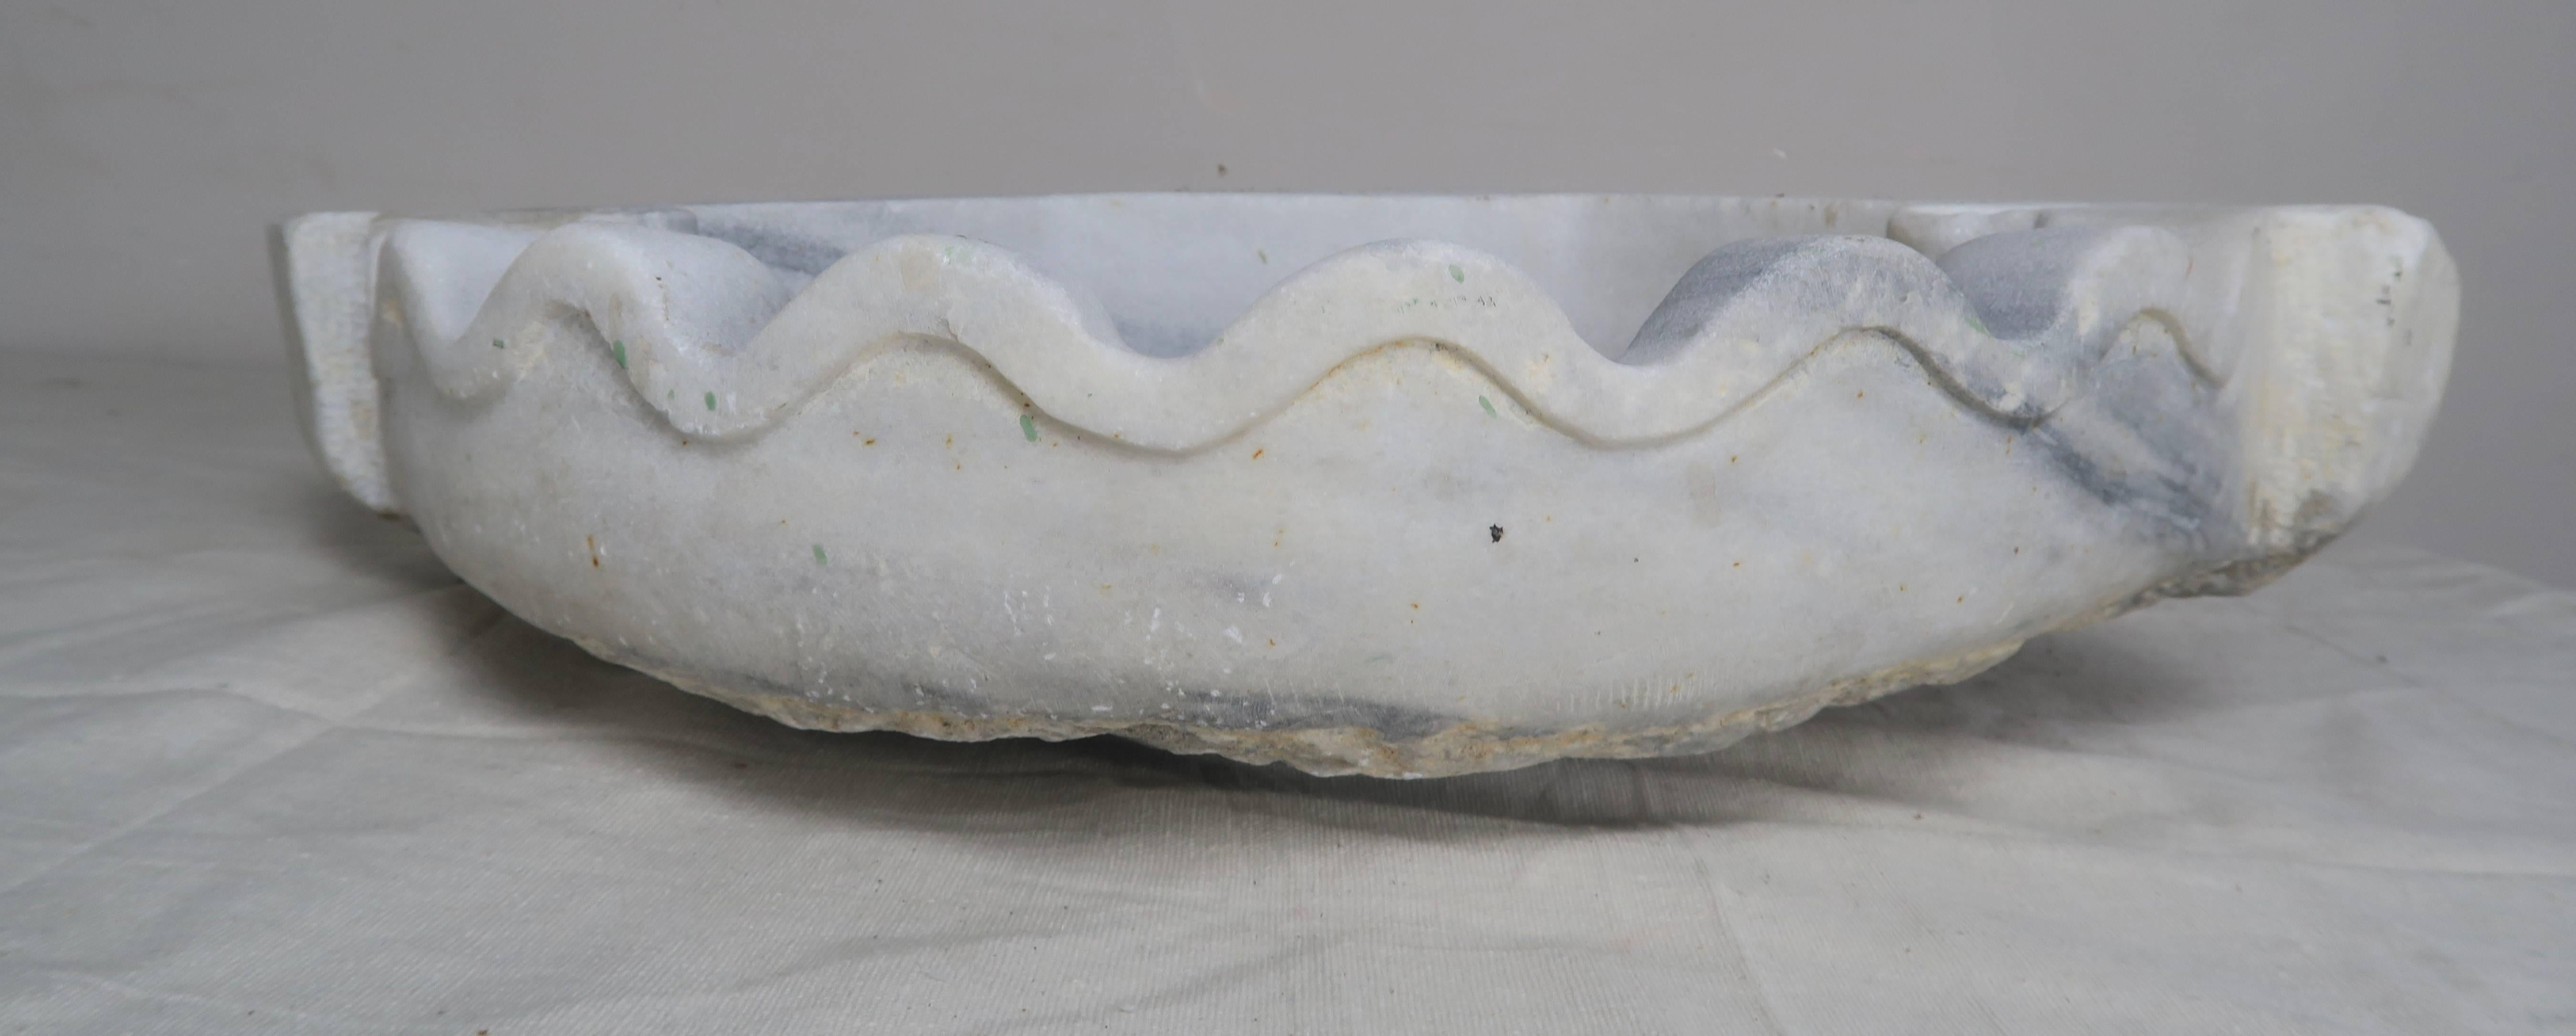 Diamond shape marble corner sink with scalloped edge and indentations for your glass.